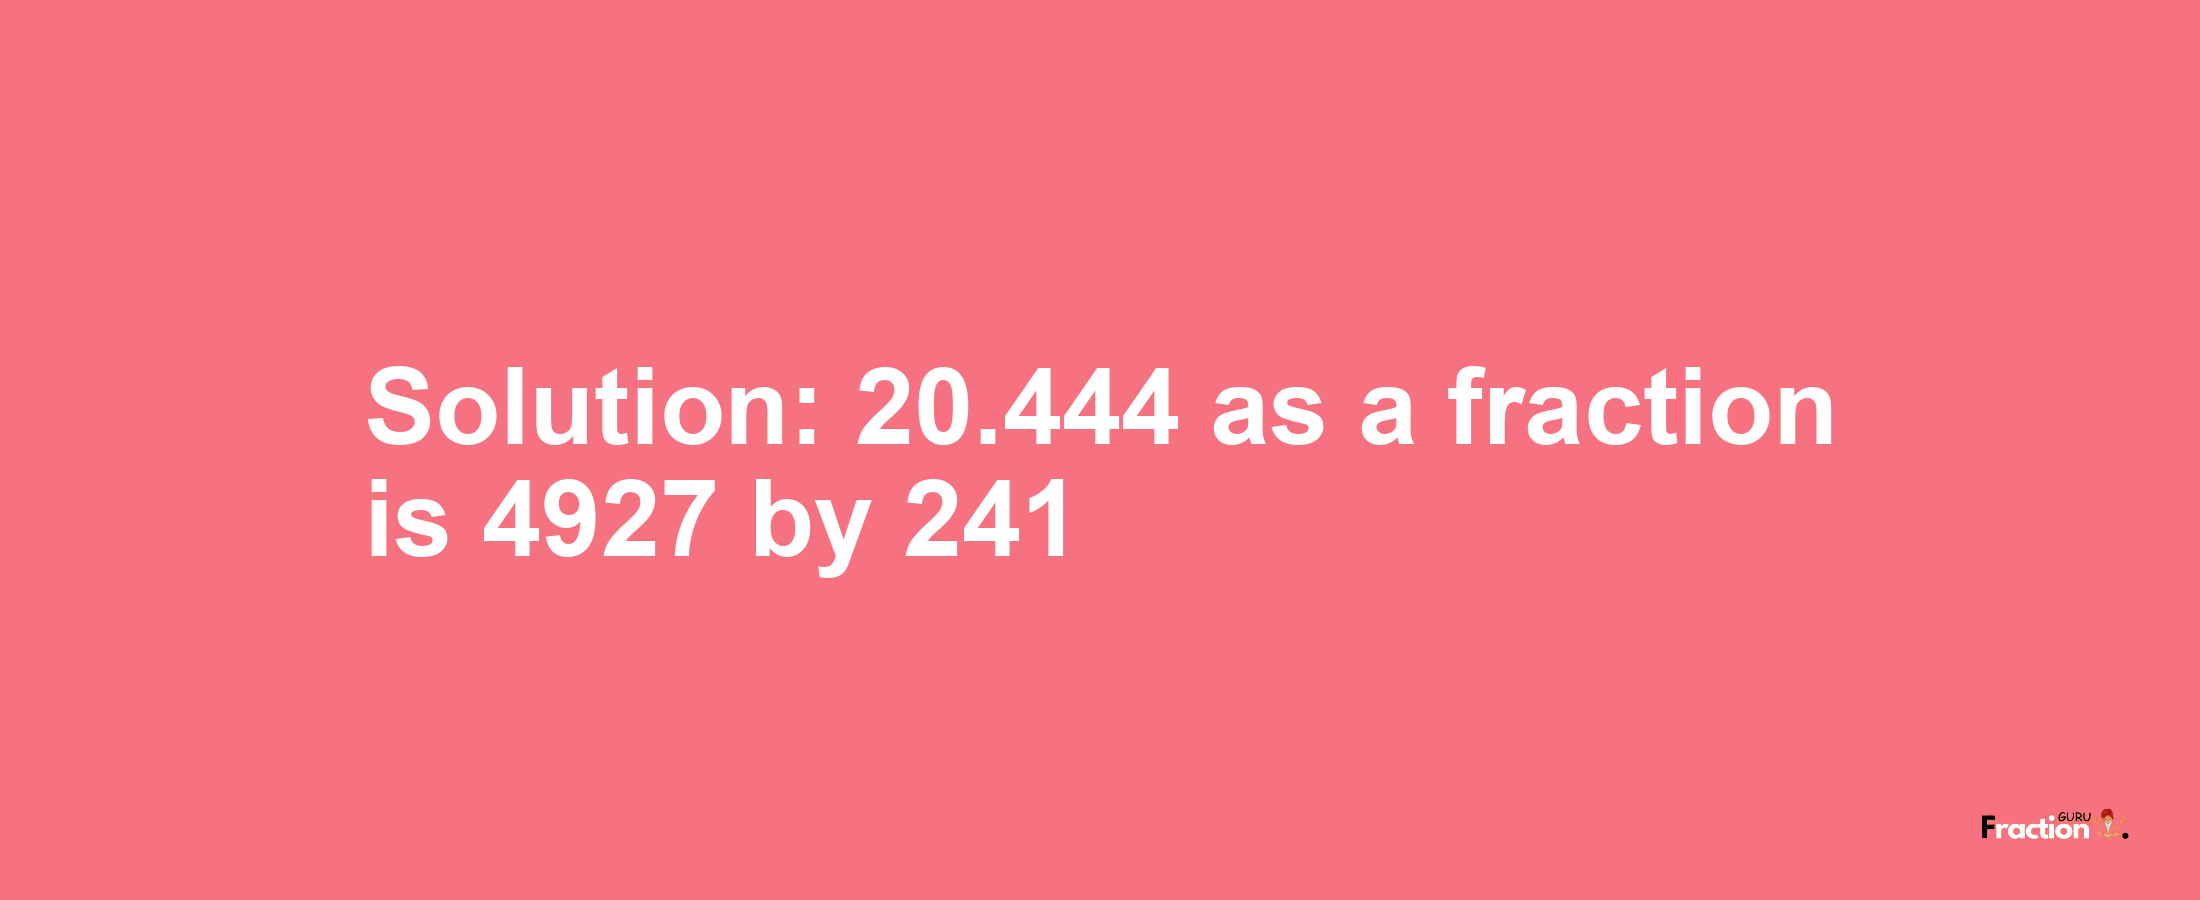 Solution:20.444 as a fraction is 4927/241